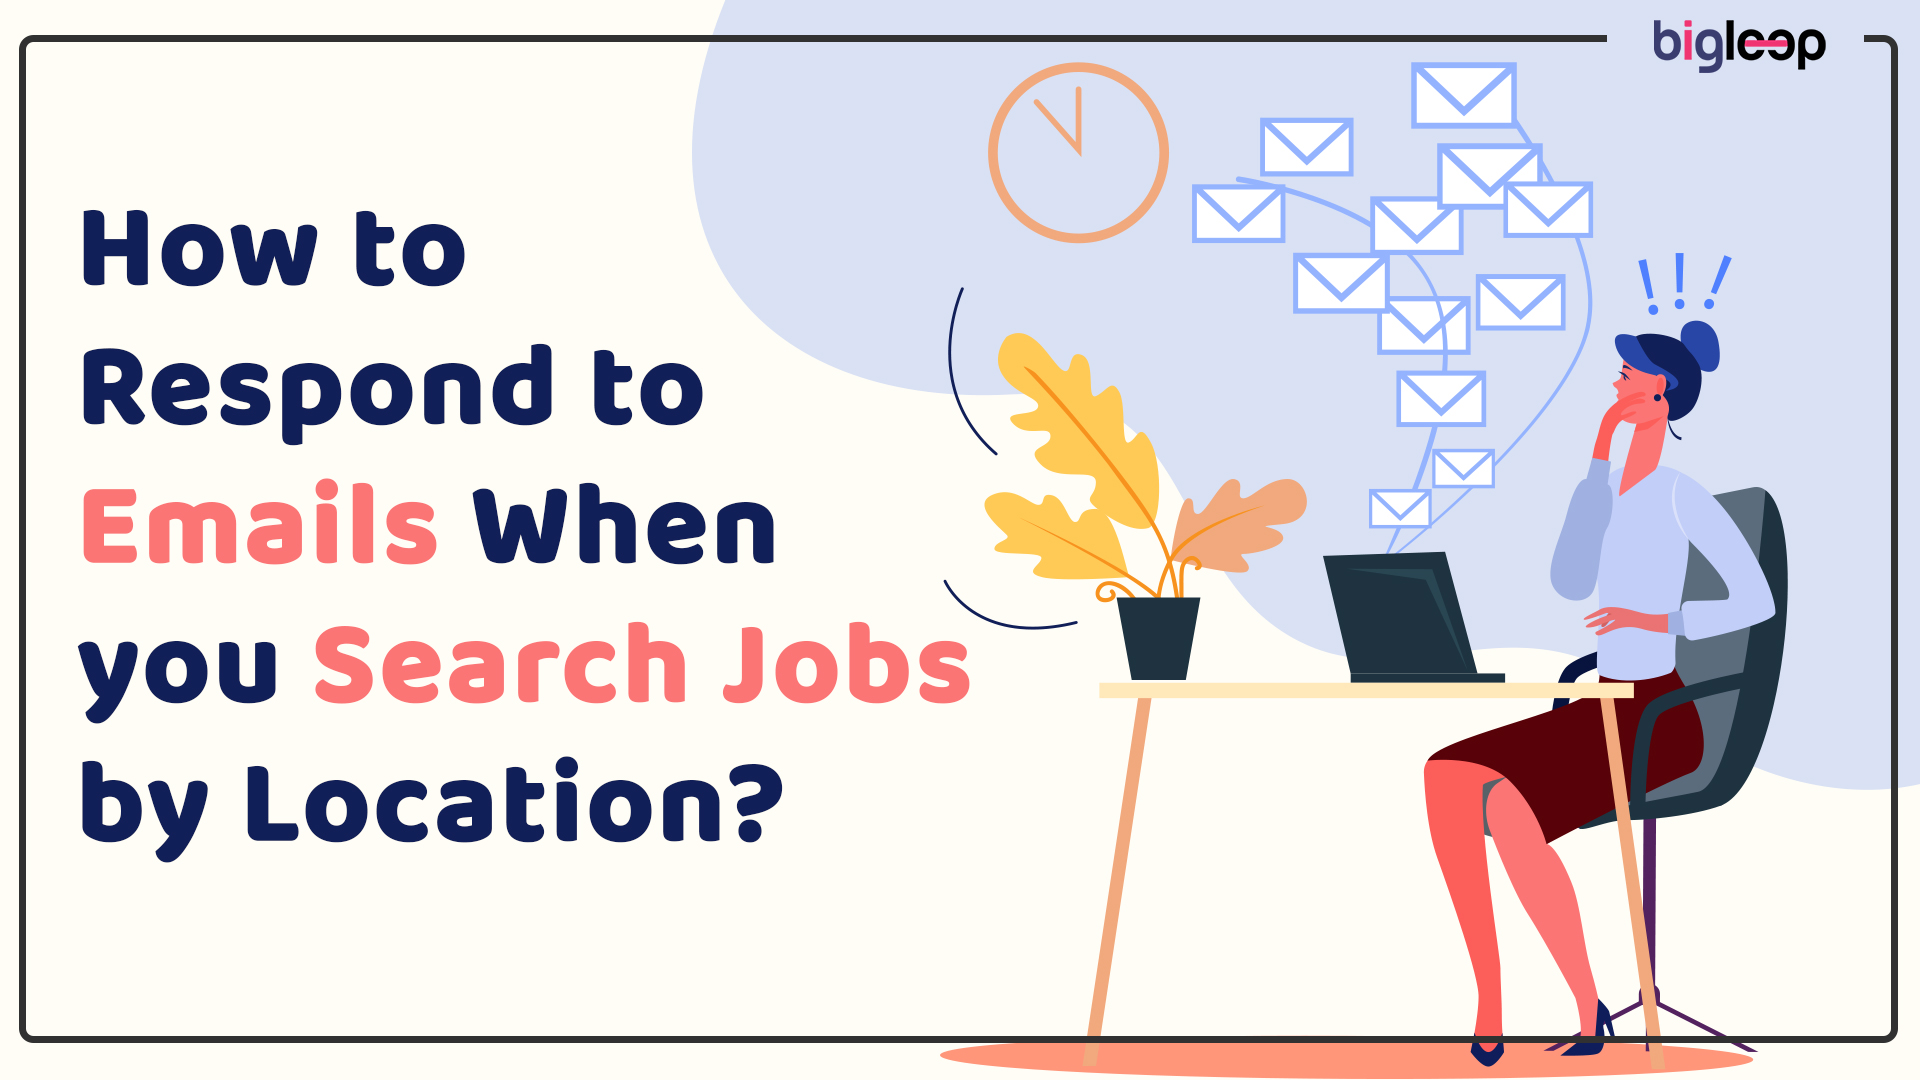 How to Respond to Emails When you Search Jobs by Location